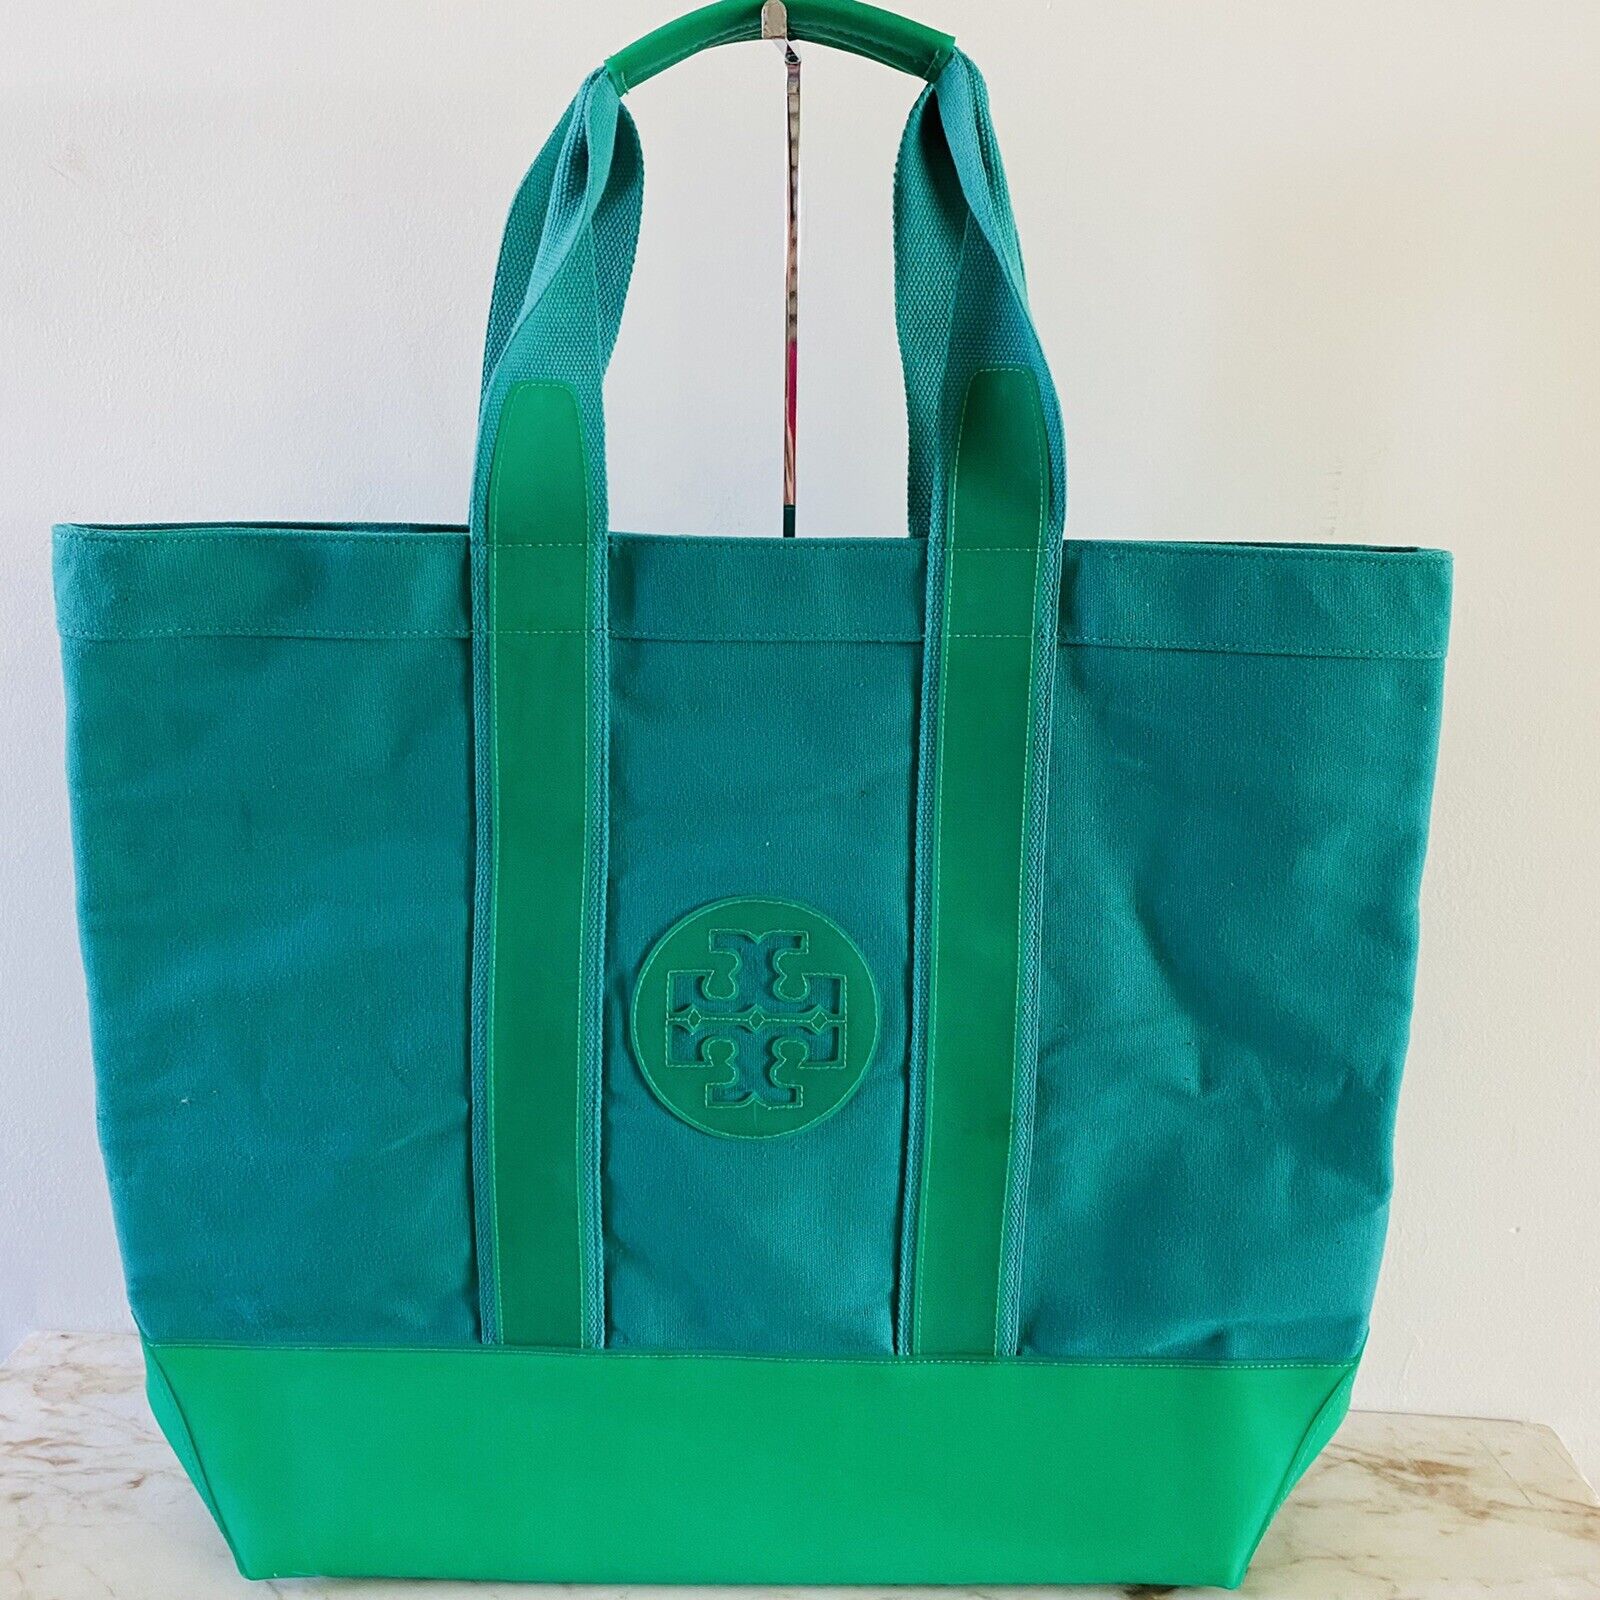 TORY BURCH Solid Green Color Block Extra Large Canvas Tote | eBay